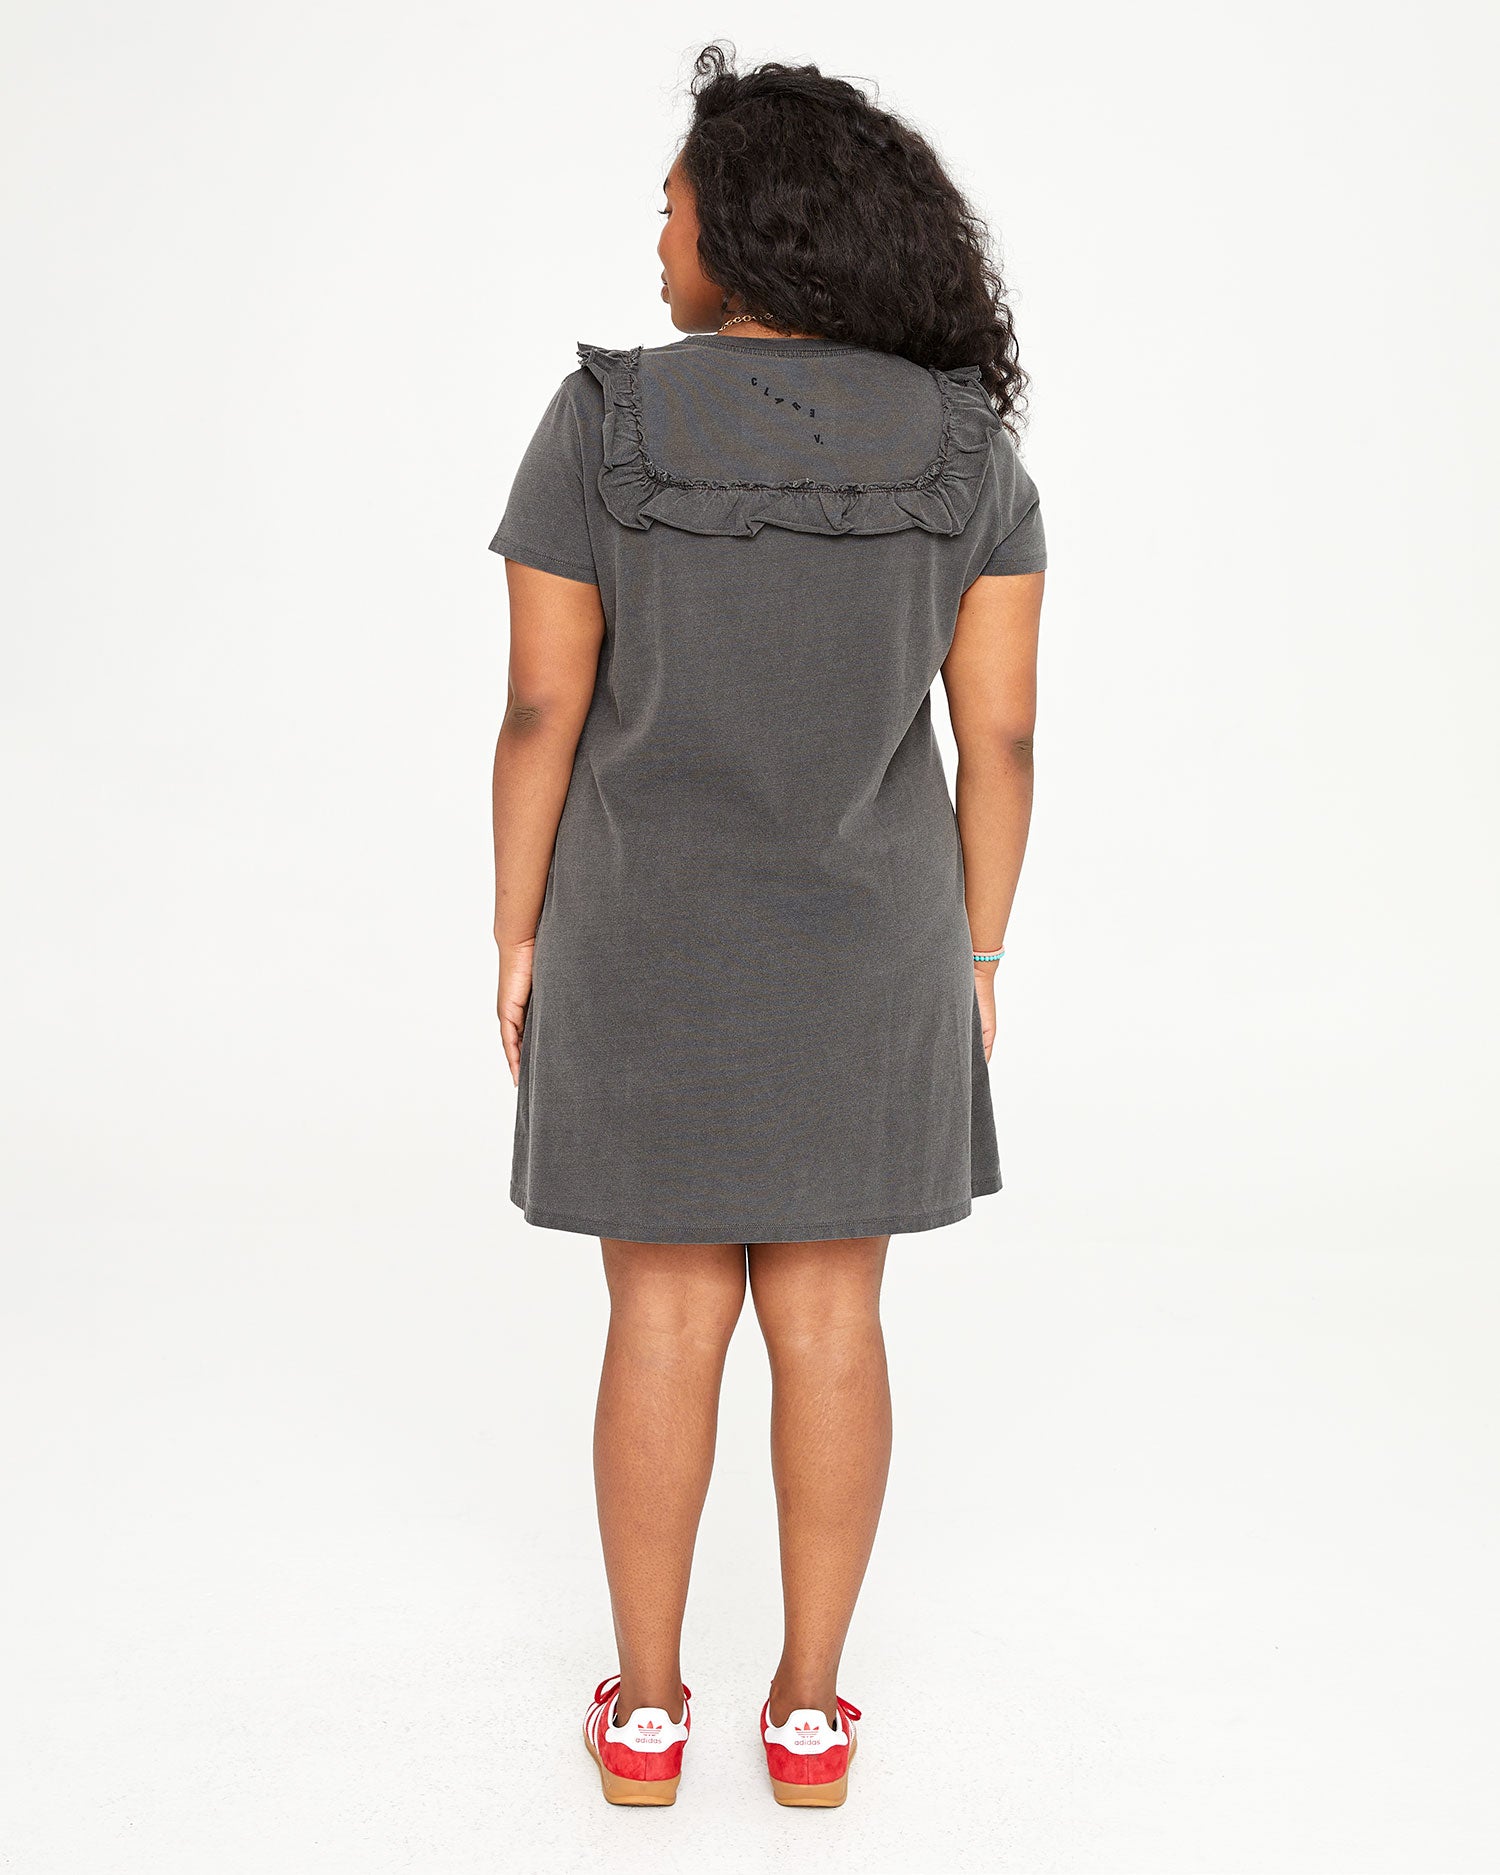 back view of candice in the Faded Black Charlotte Ruffle T-Shirt Dress